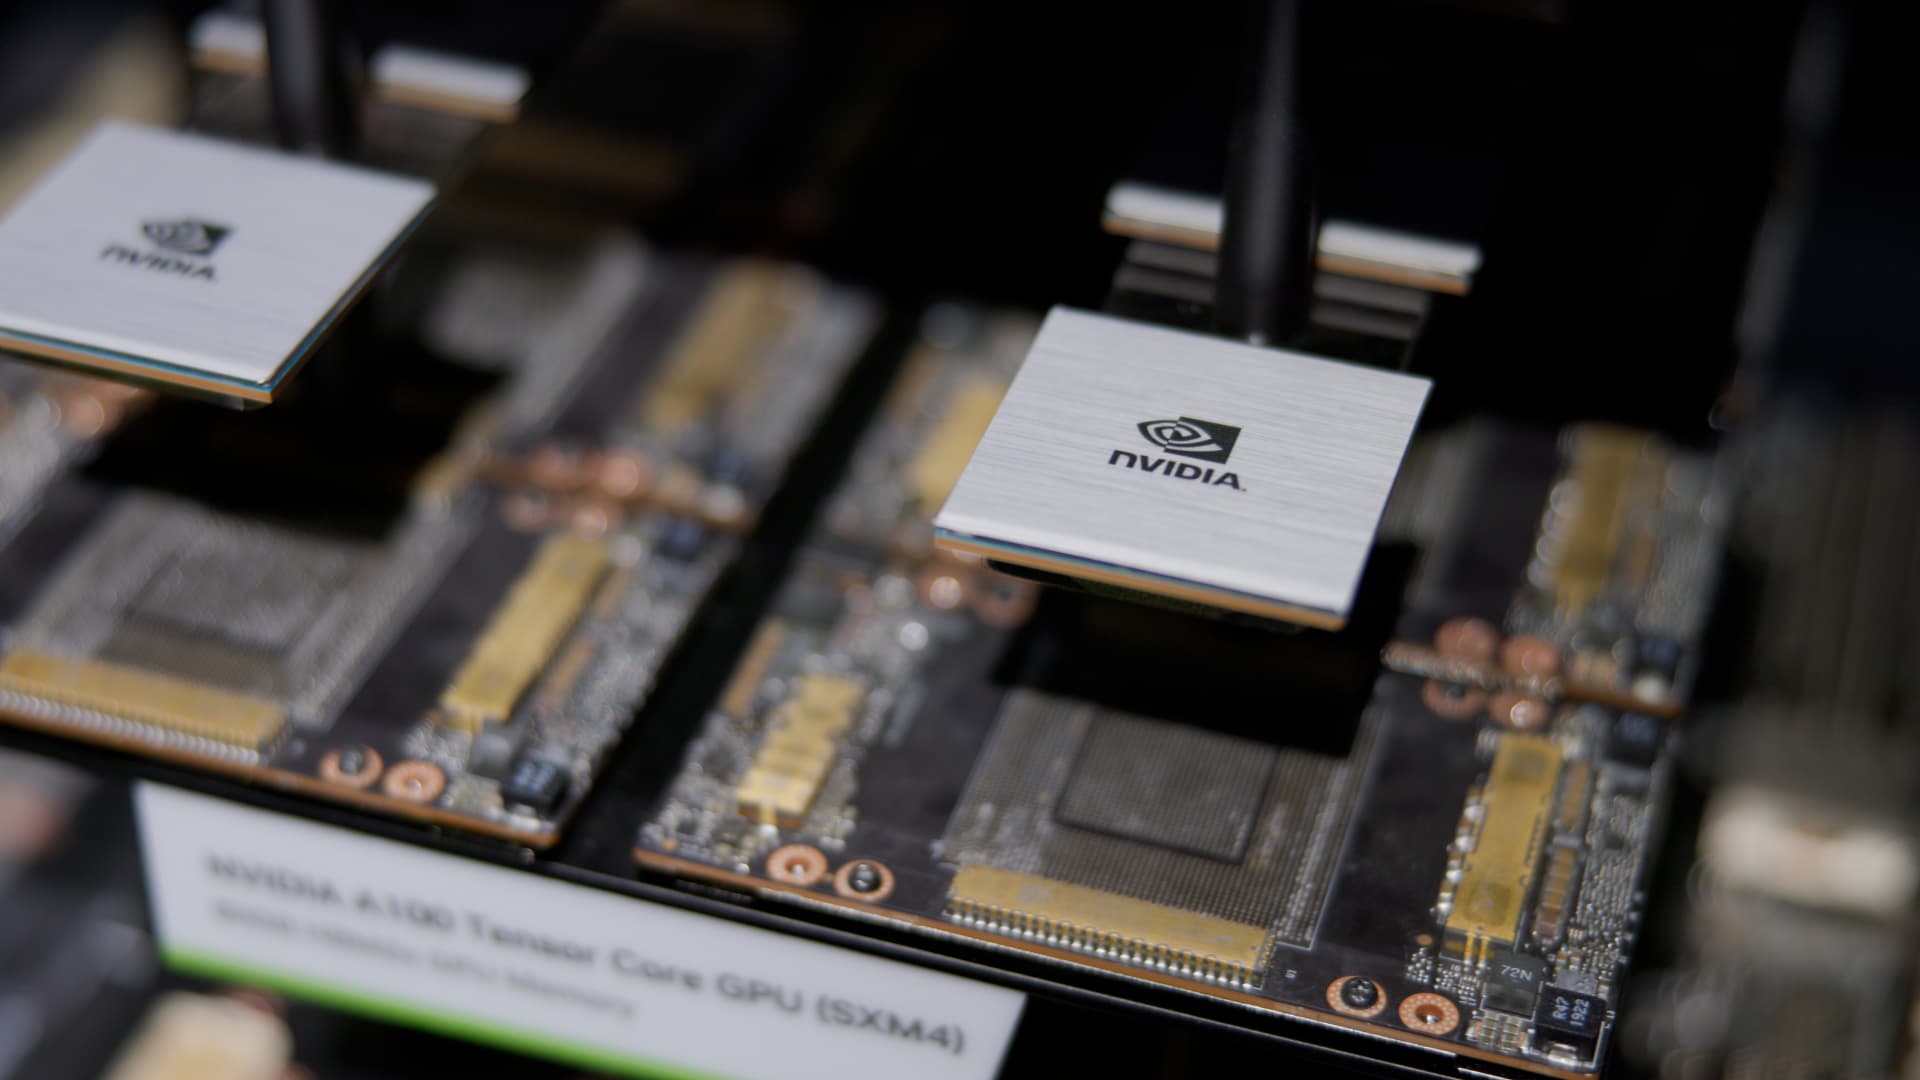 Nvidia's stock could rise fivefold in 10 years on A.I. trend, says fund manager